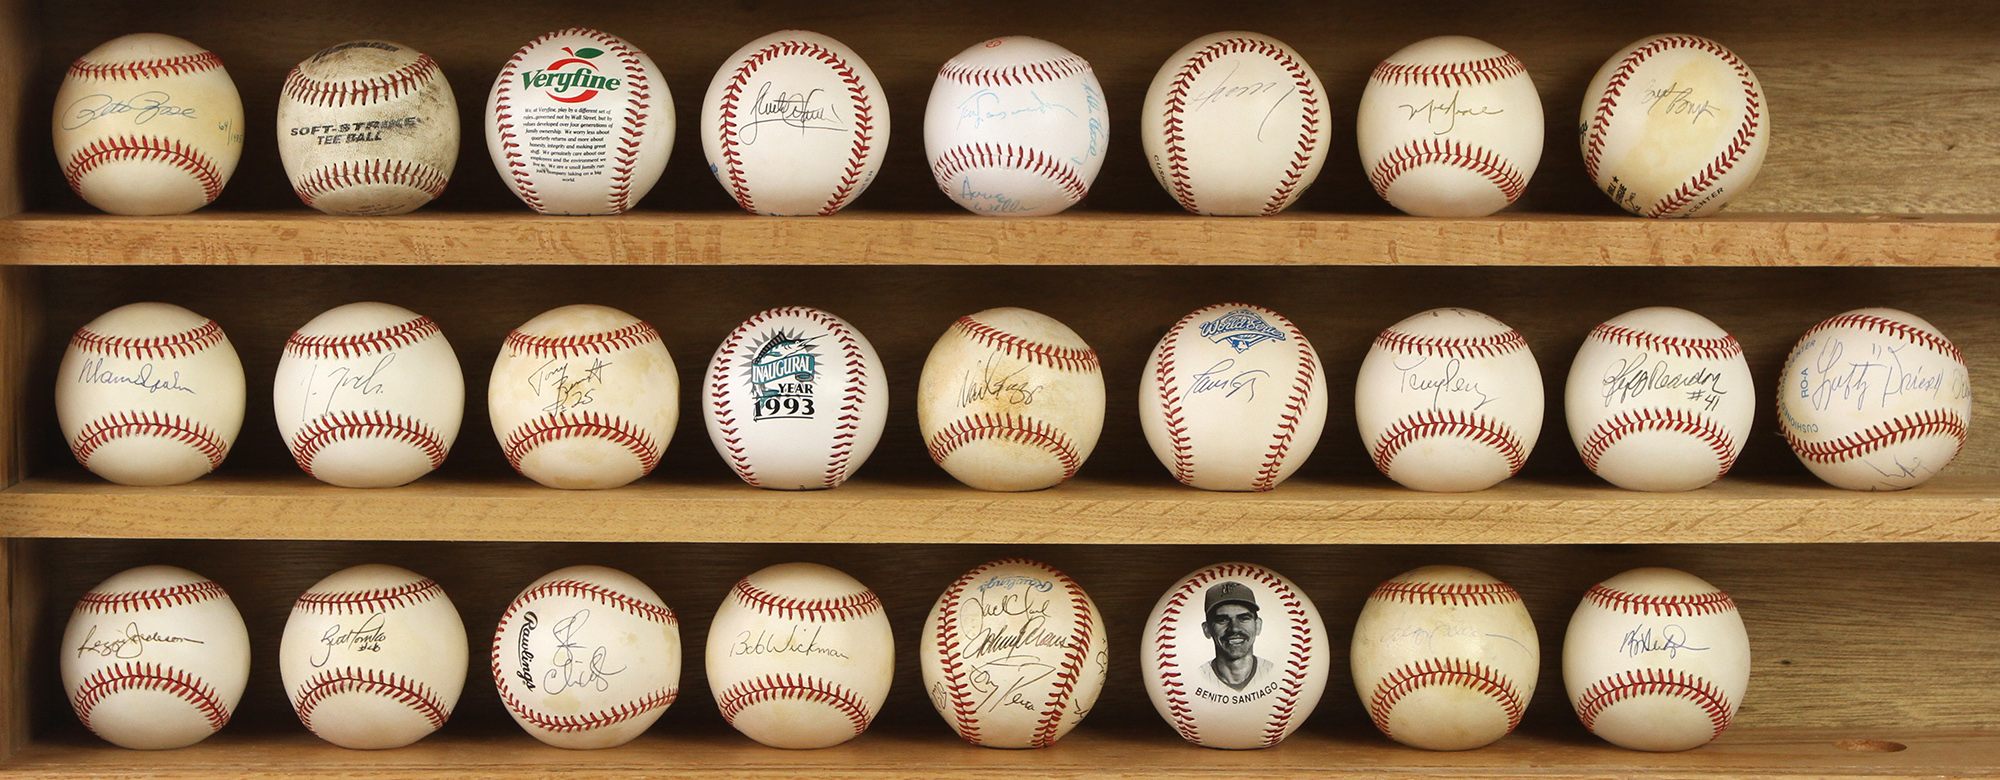 Lot Detail 1980 S 90 S Signed Baseball Collection Lot